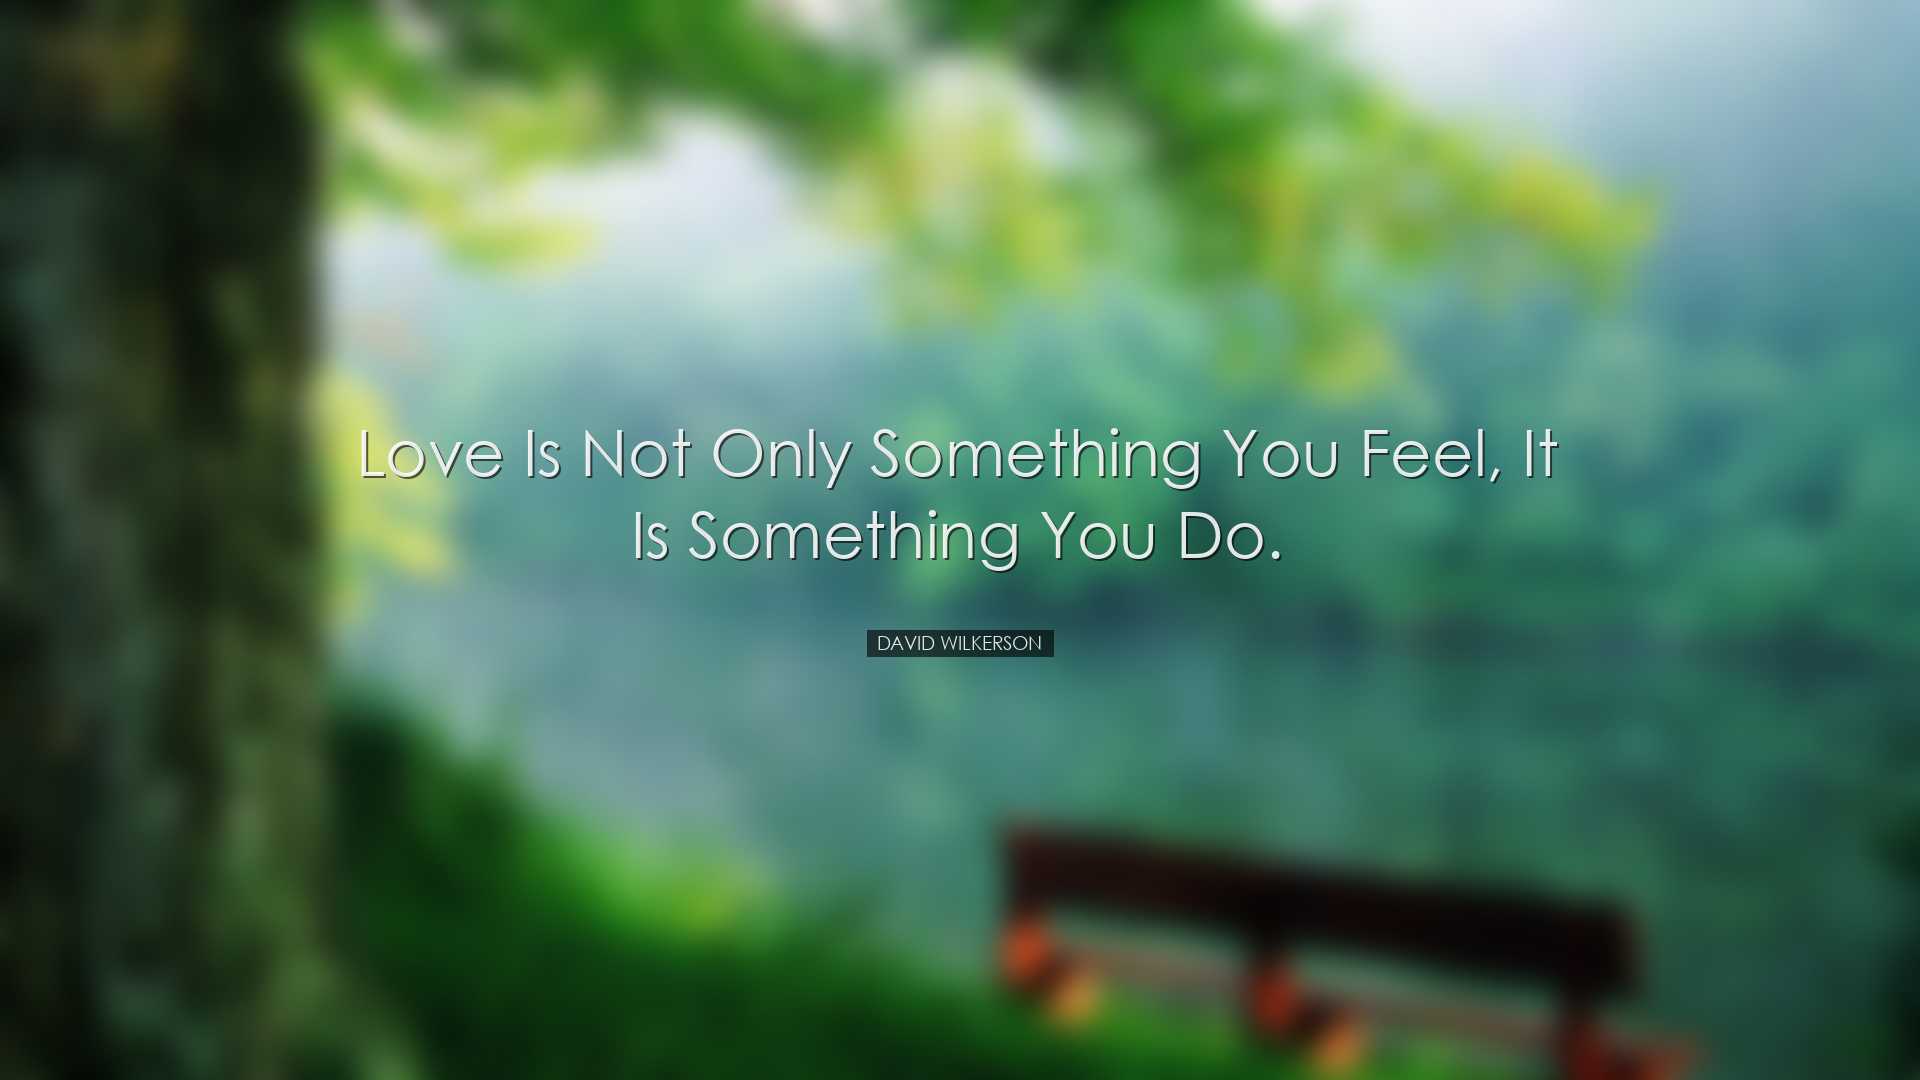 Love is not only something you feel, it is something you do. - Dav